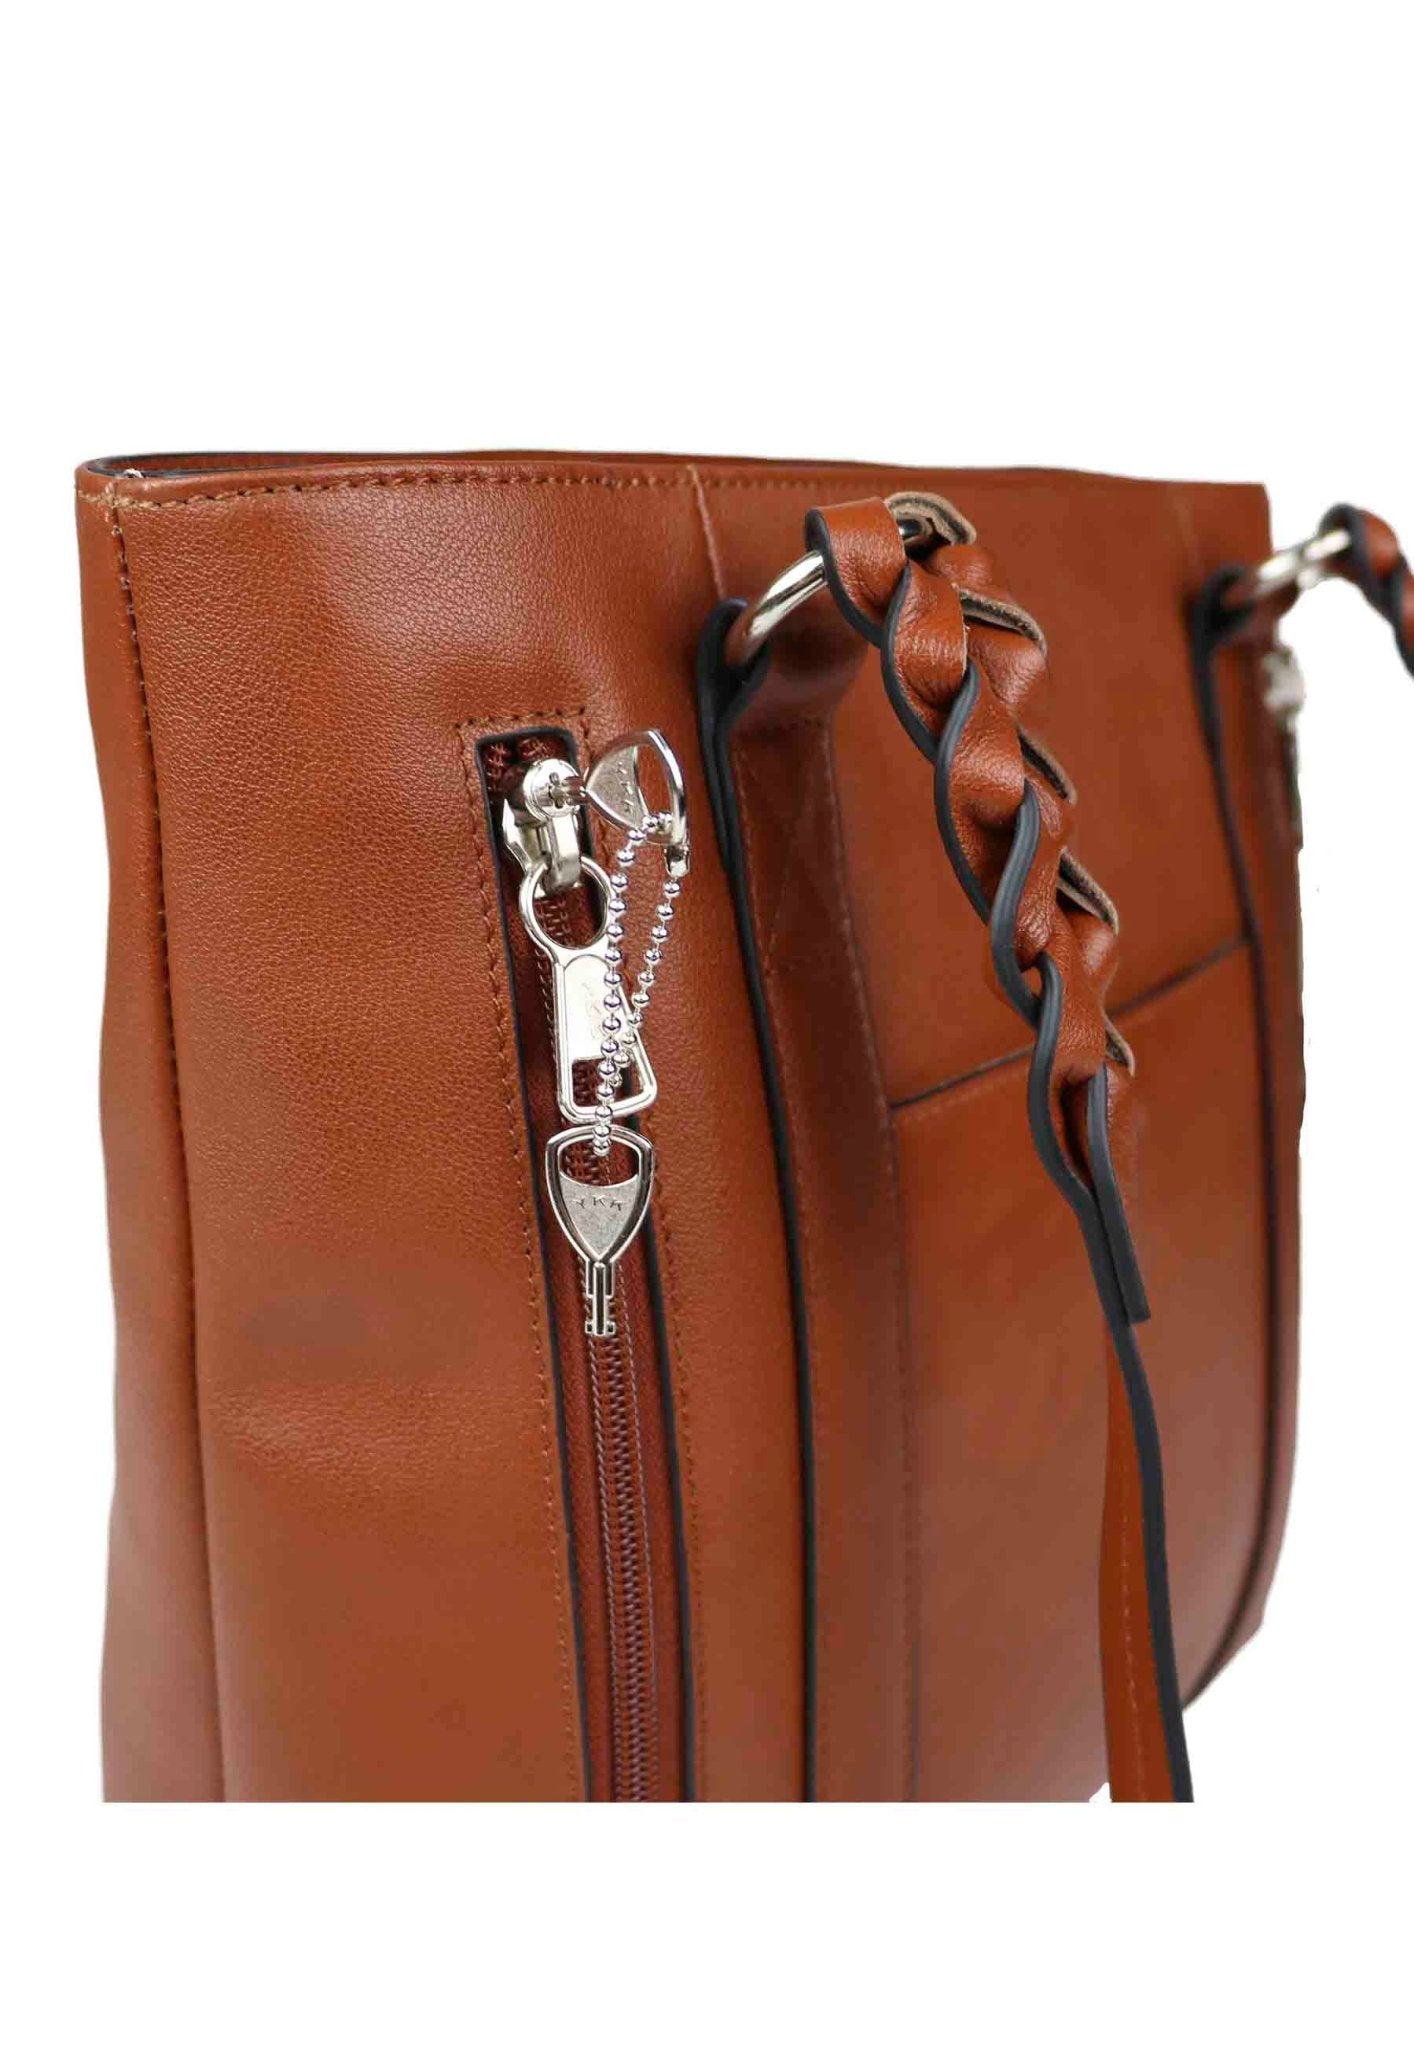 Bella leather conceal carry purse - ArmedAF